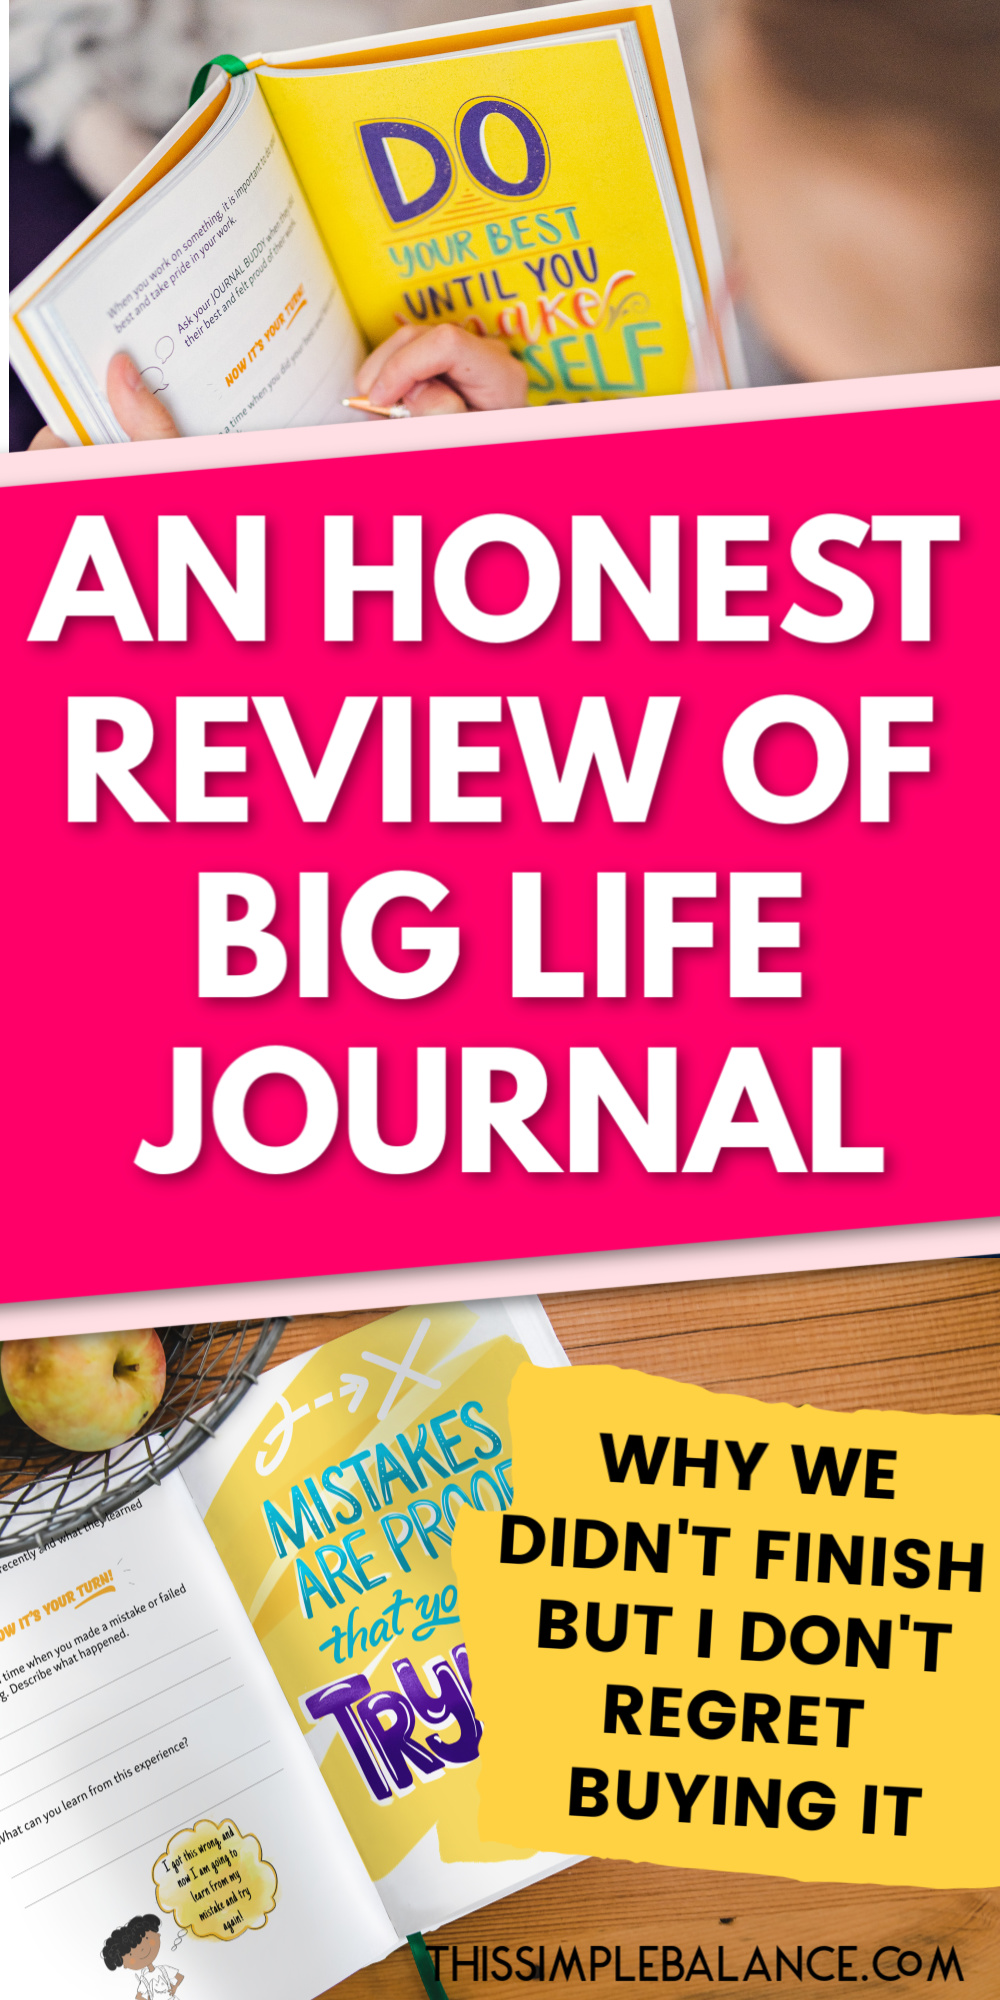 Big Life Journal Second Edition open with child writing, text overlay, "an honest review of big life journal - why we didn't finish but I don't regret buying it", big life journal second edition open on counter held in place with basket of apples